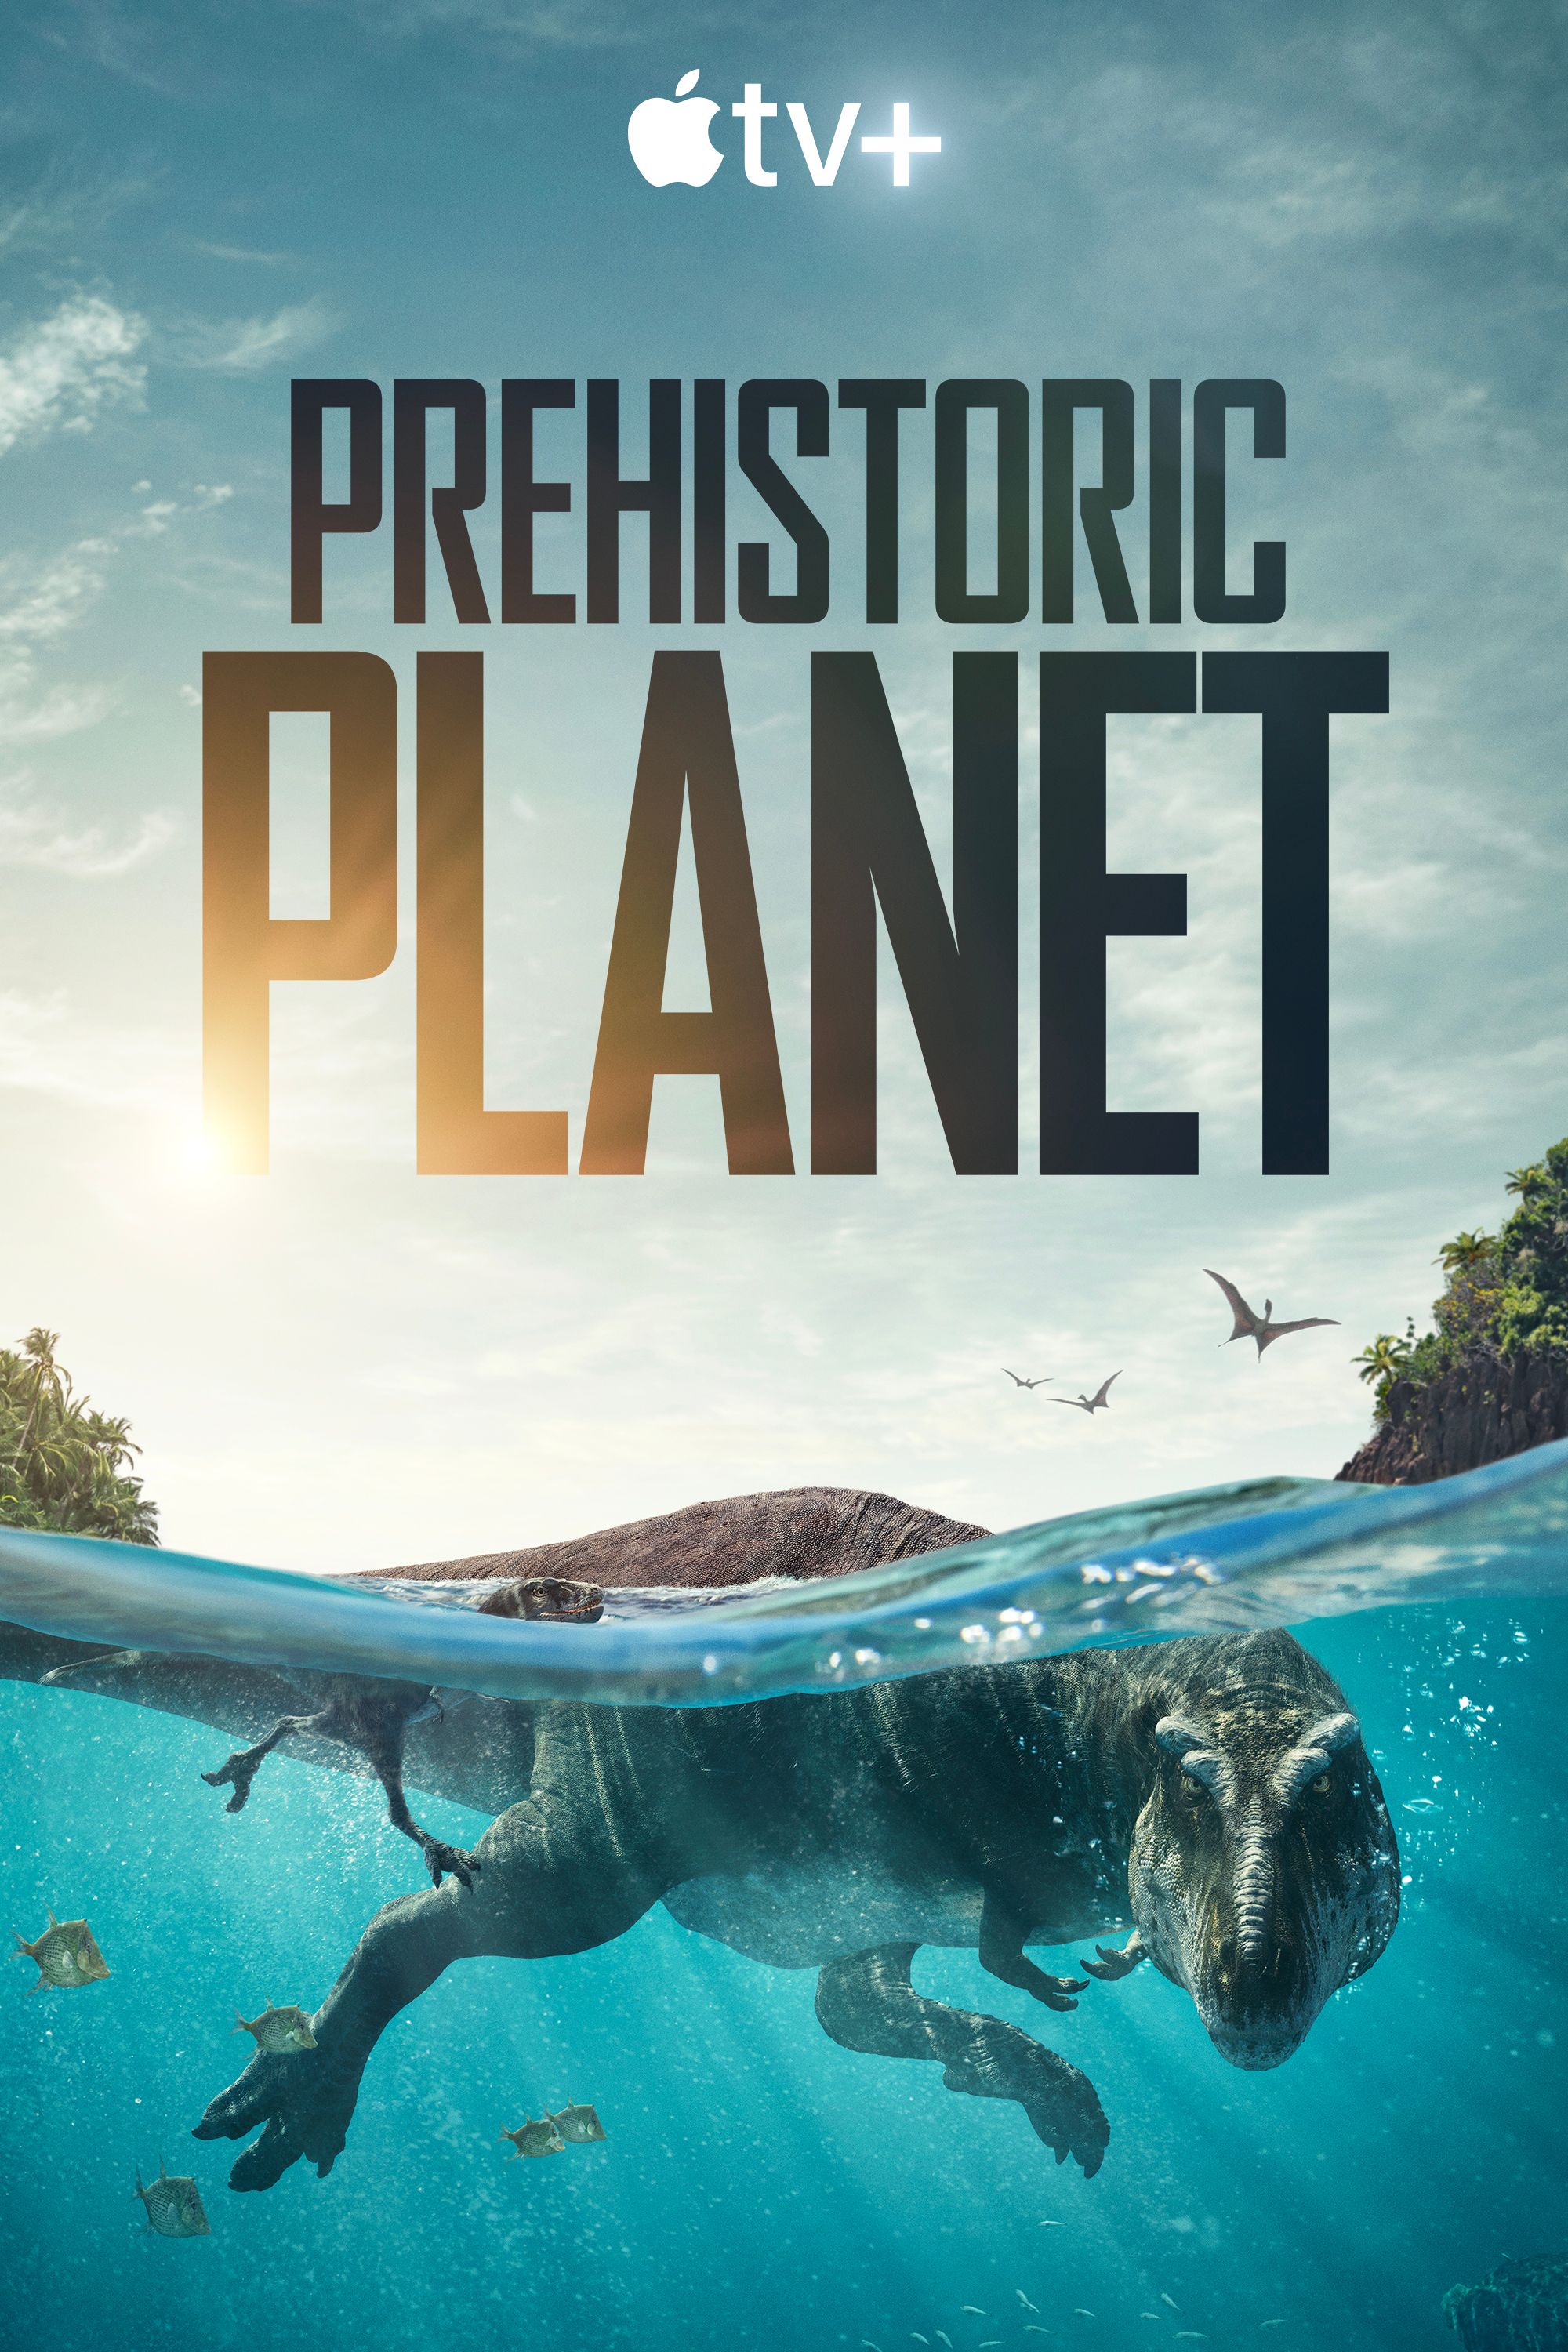 prehhistoric planet poster